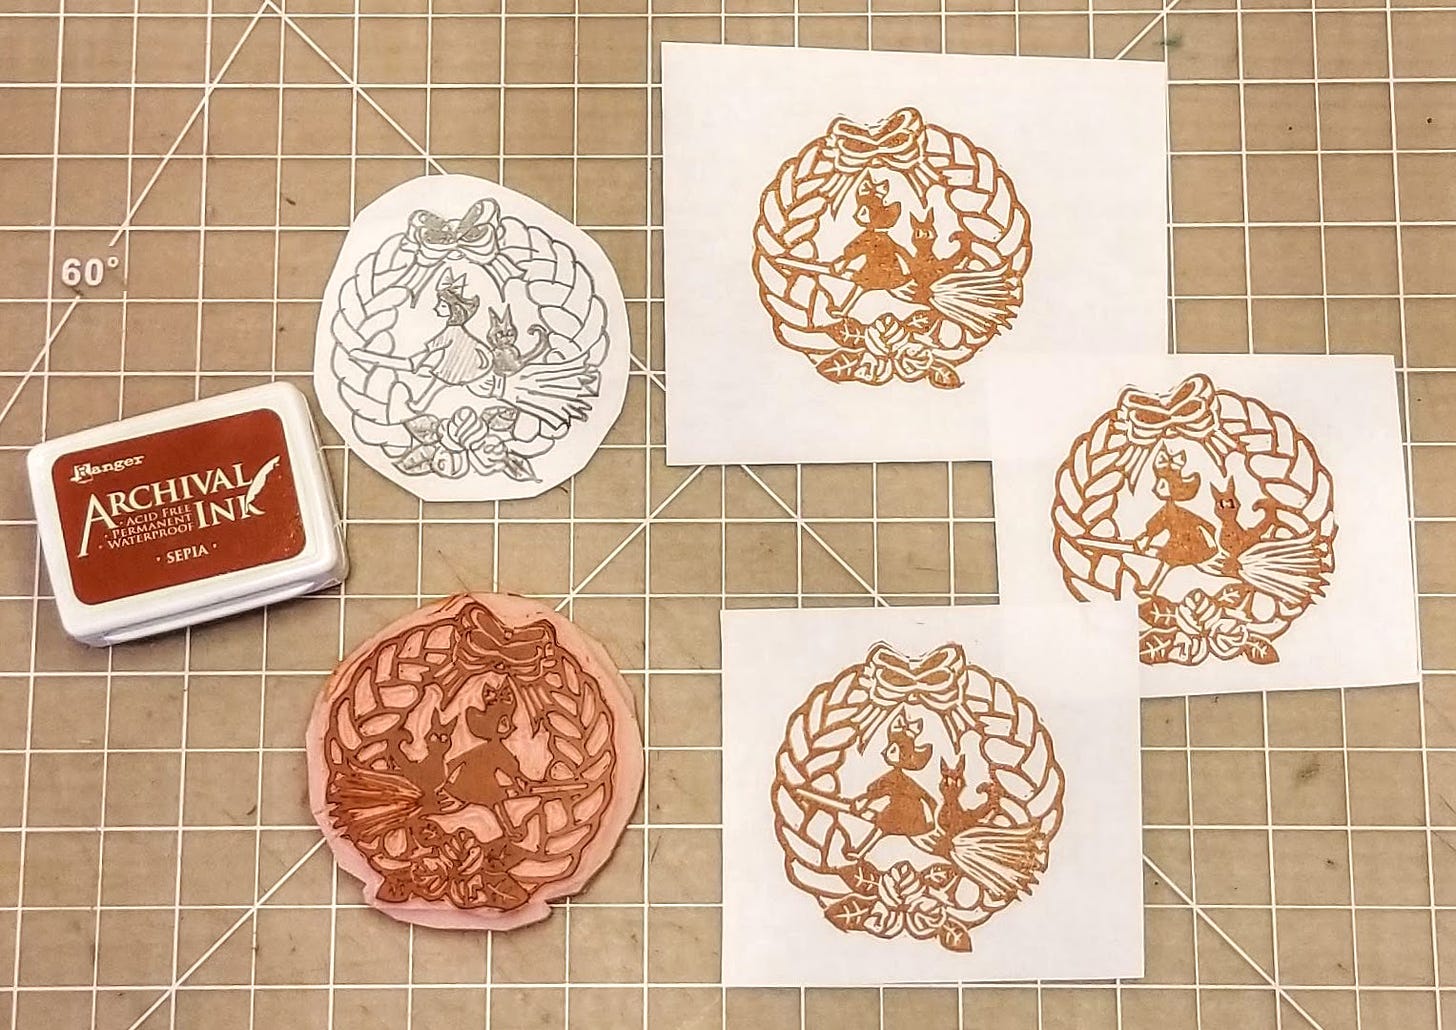 haand-carved stamp of the bakery sign from Kiki's Delivery Service next to an ink pad and three small prints